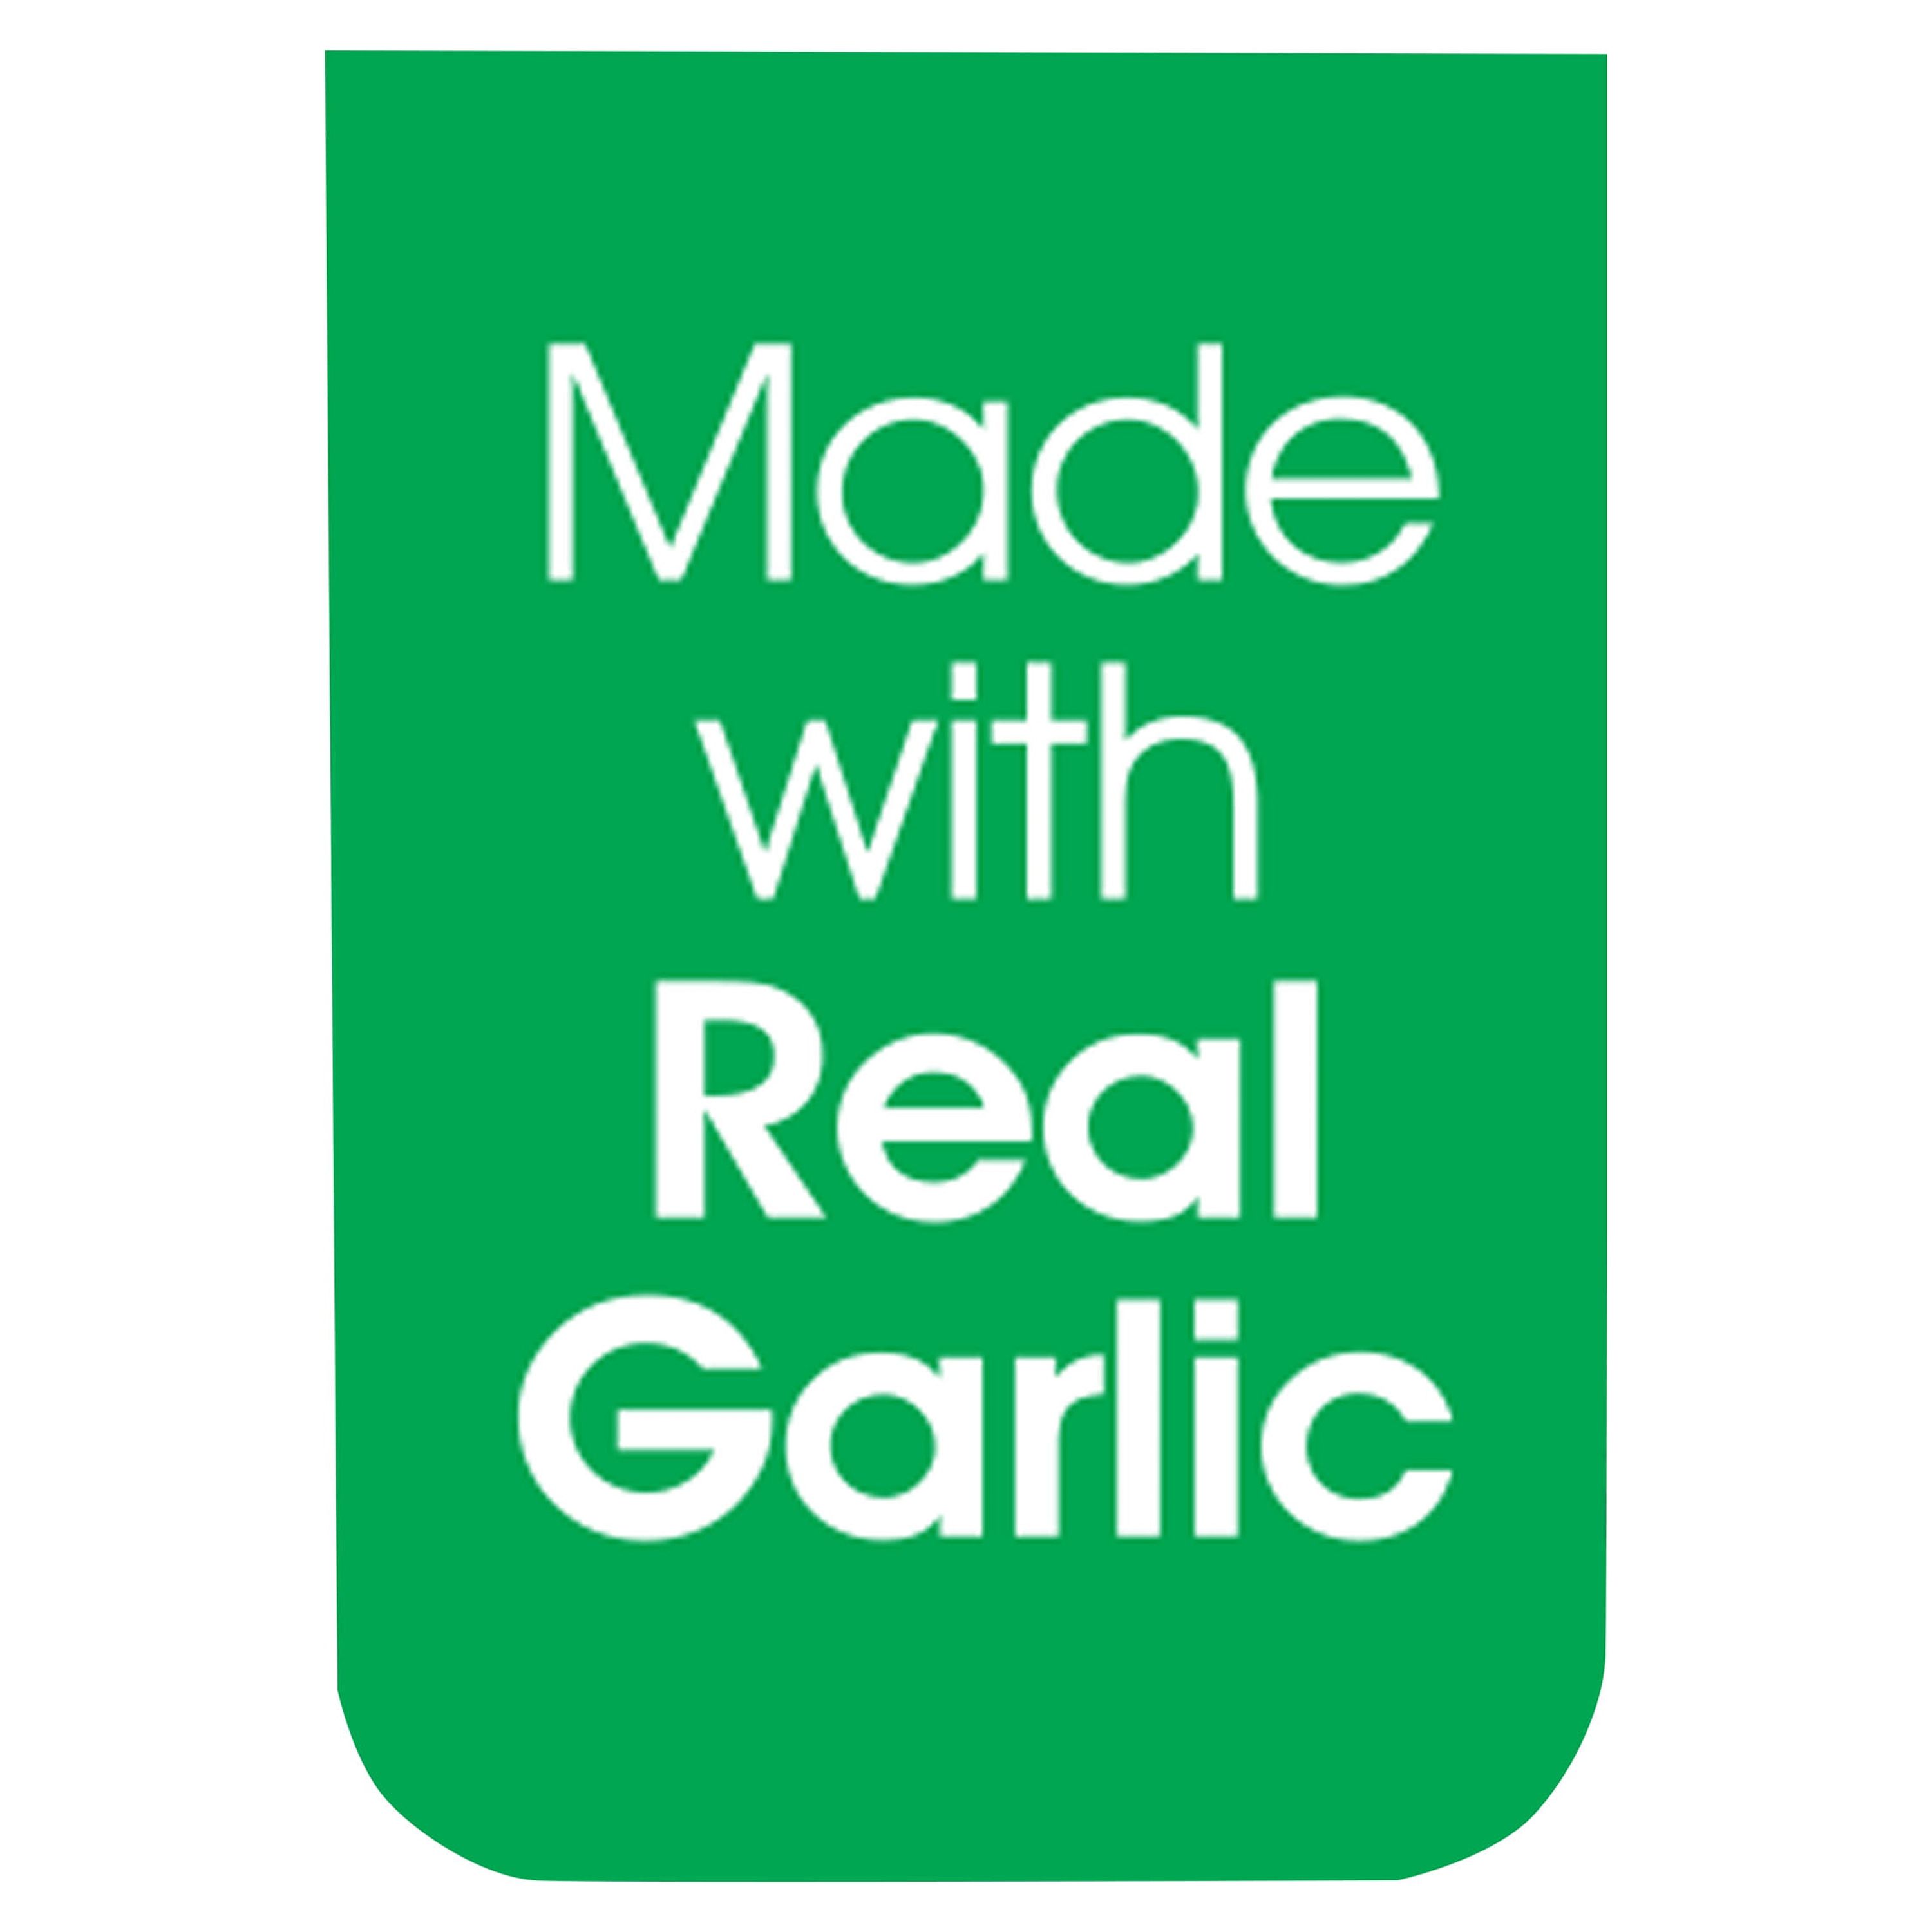 Great Value Garlic Texas Toast, 11.25 oz, 8 Count - image 3 of 9